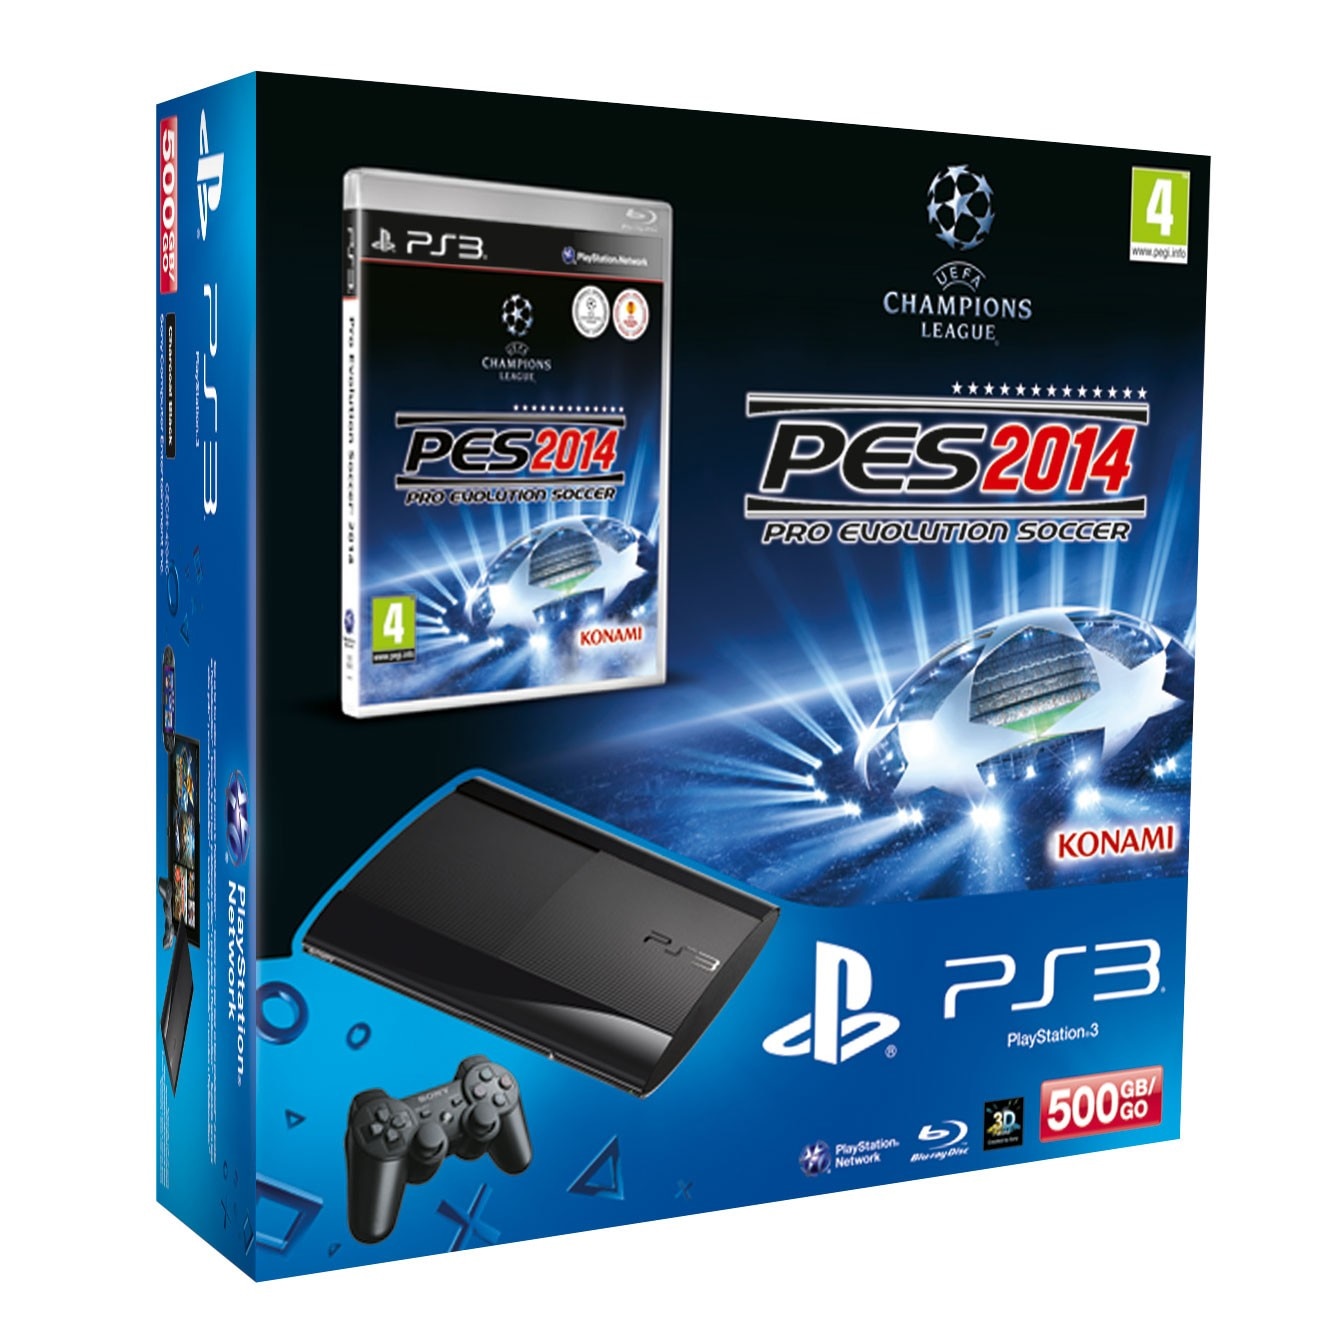 At first color Realistic Consola Sony PlayStation 3, 500GB + Joc Pro Evolution Soccer 2014 - eMAG.ro